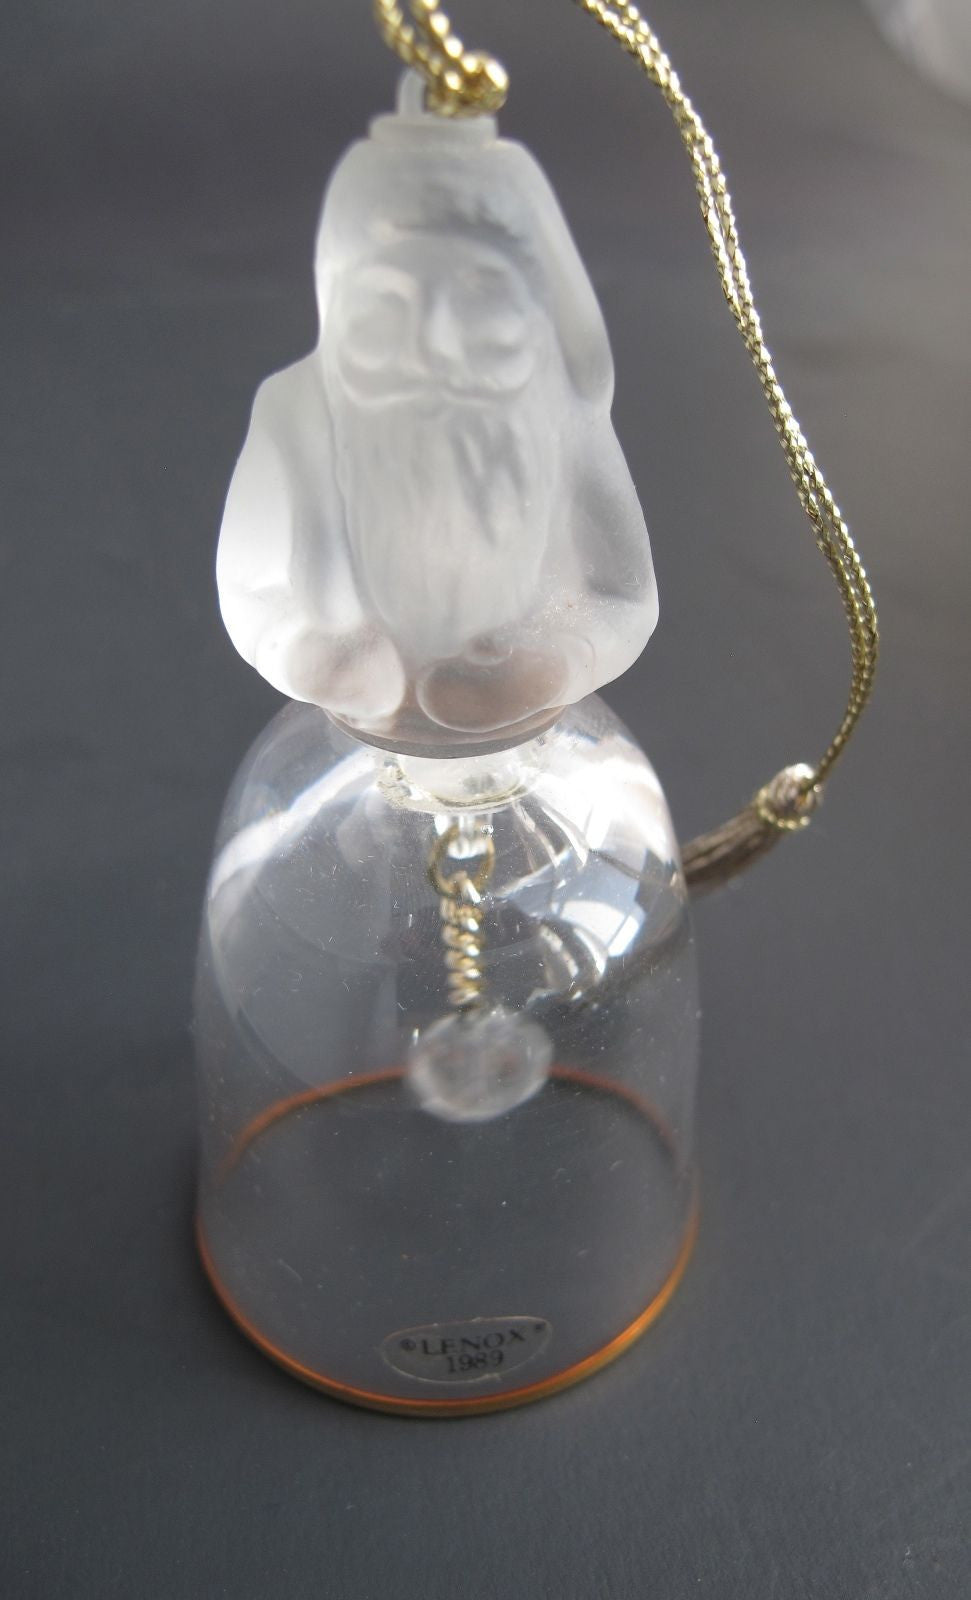 Lenox Crystal 1989 St. Nicholas Tree miniature bell ornament Made in USA - O'Rourke crystal awards & gifts abp cut glass